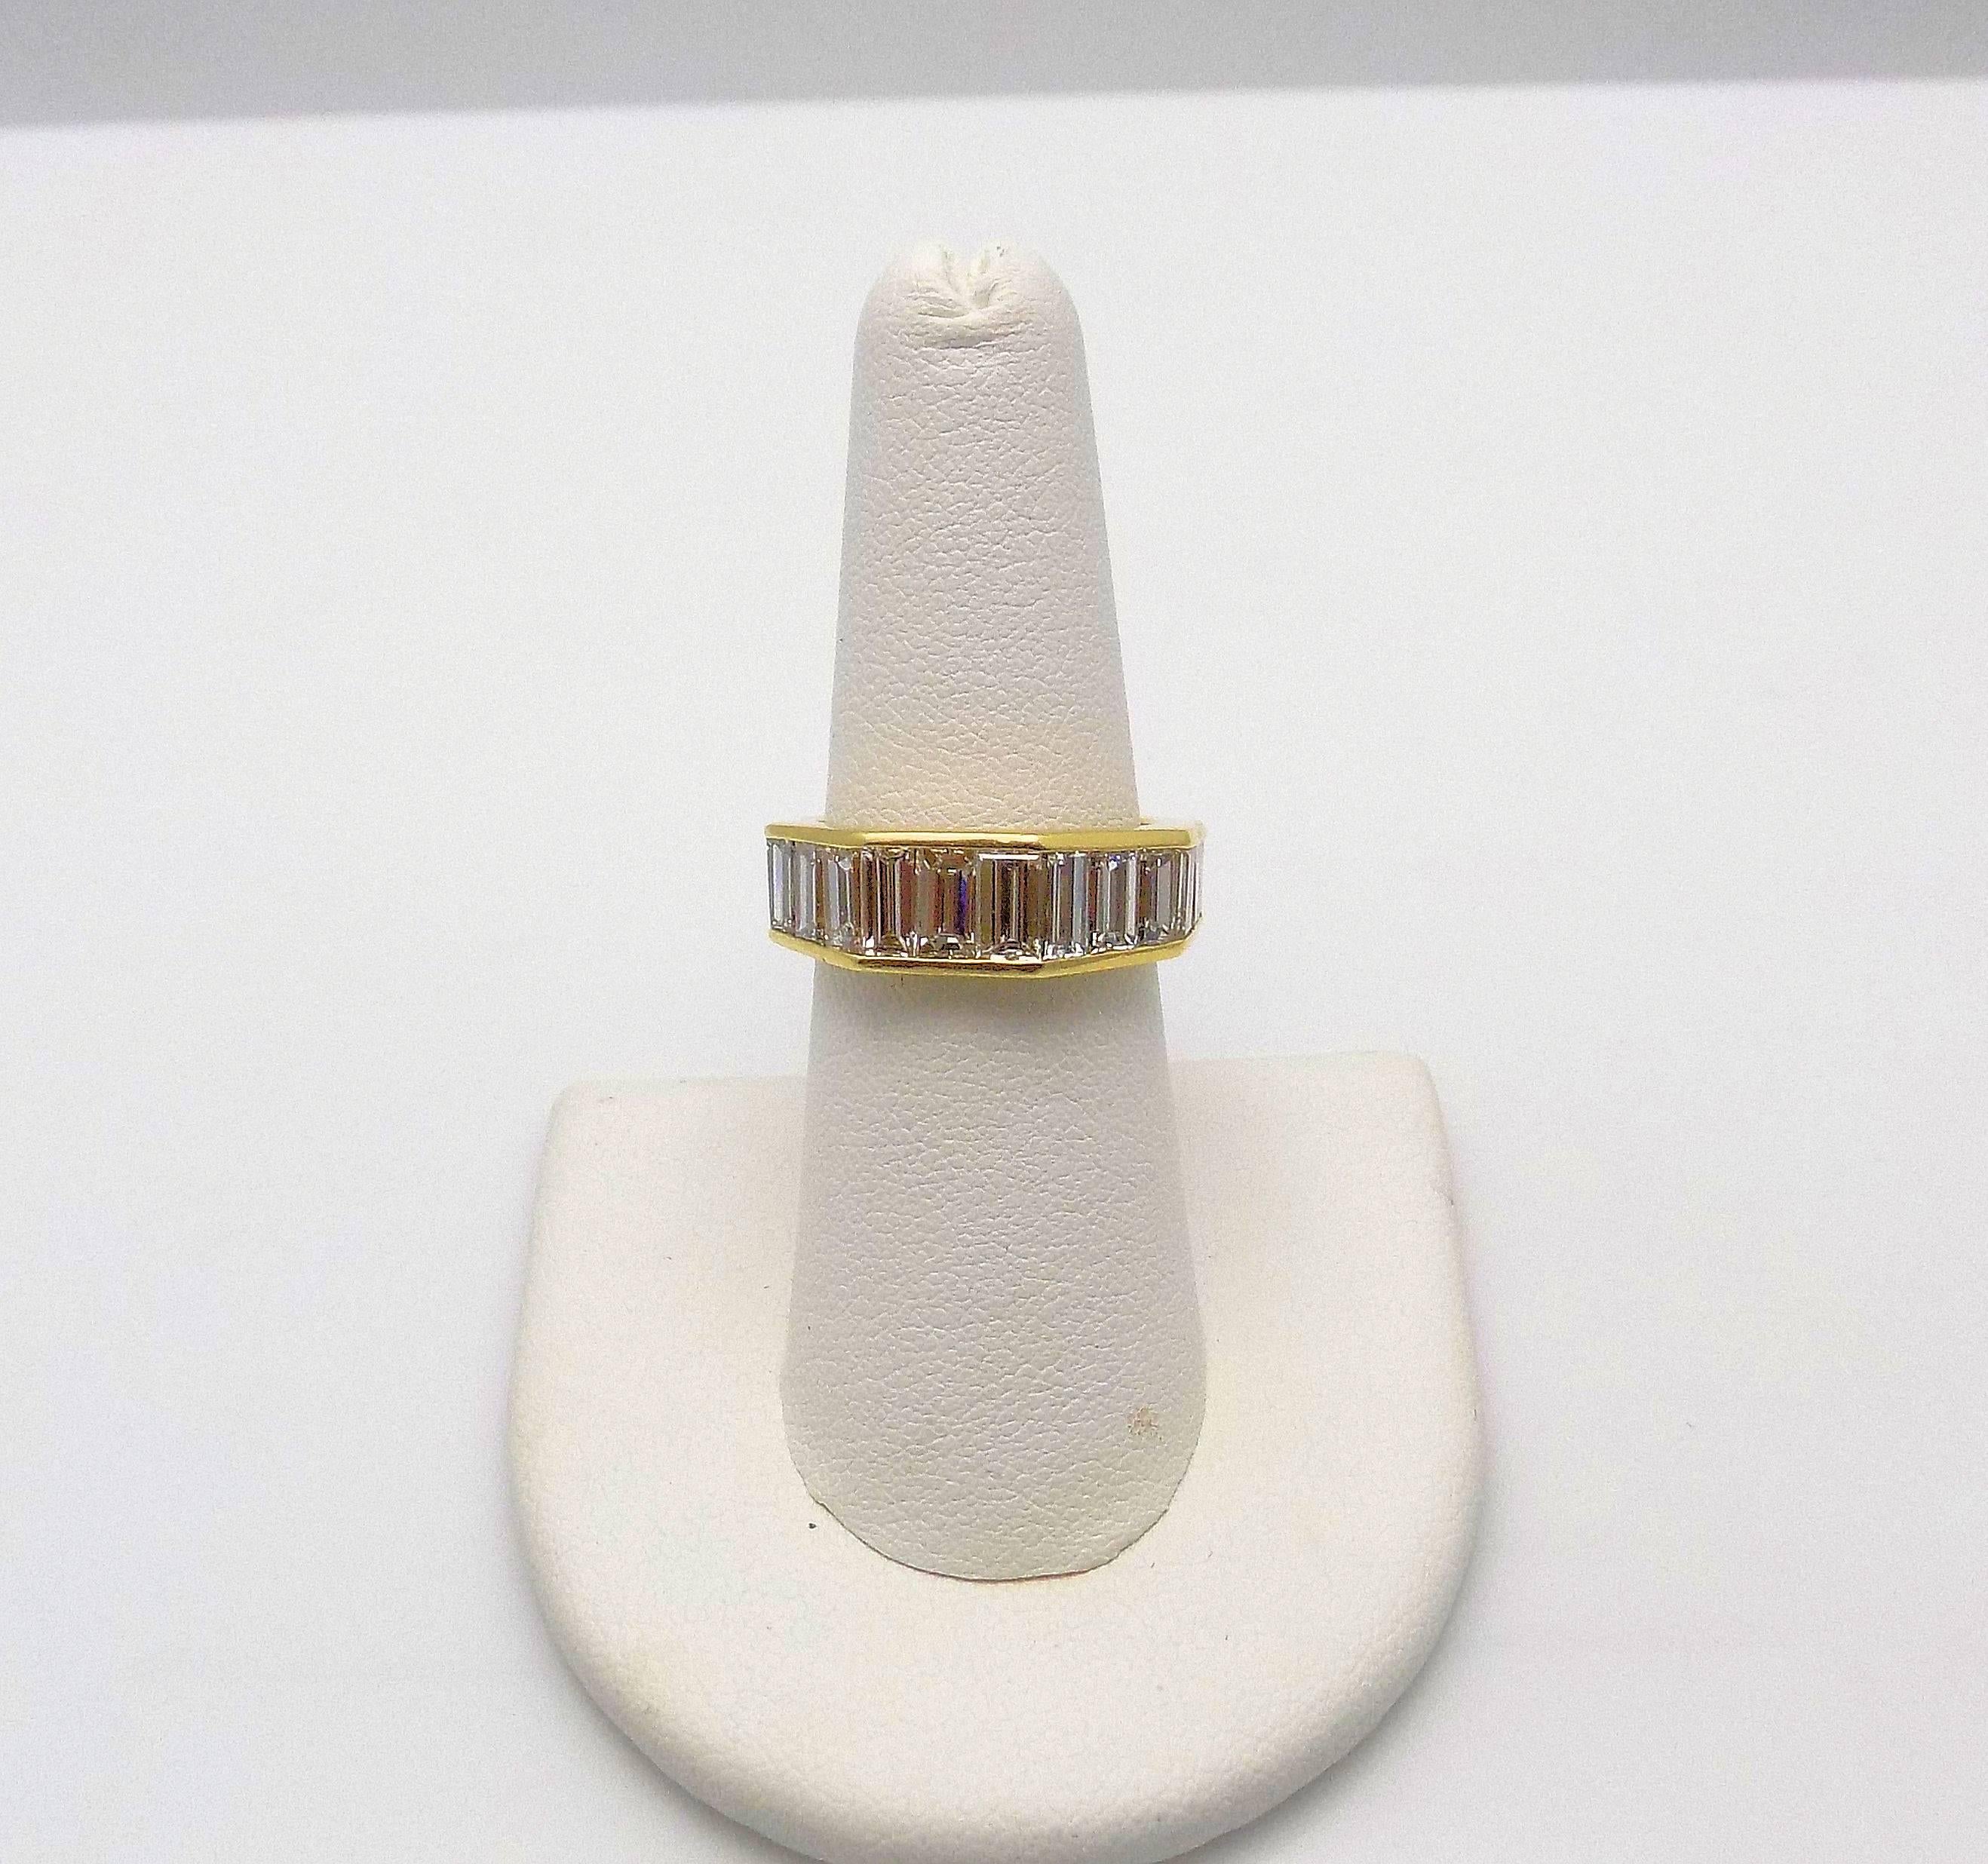 Impressive 18 Karat Yellow Gold Wedding Band, Tapered, Hexagonal Shape Featuring 22 Baguette Cut Diamonds 7.00 Carat Total Weight VS, H-I. Ring Size/Finger Size 7; 4.5 DWT or 7.00 Grams.